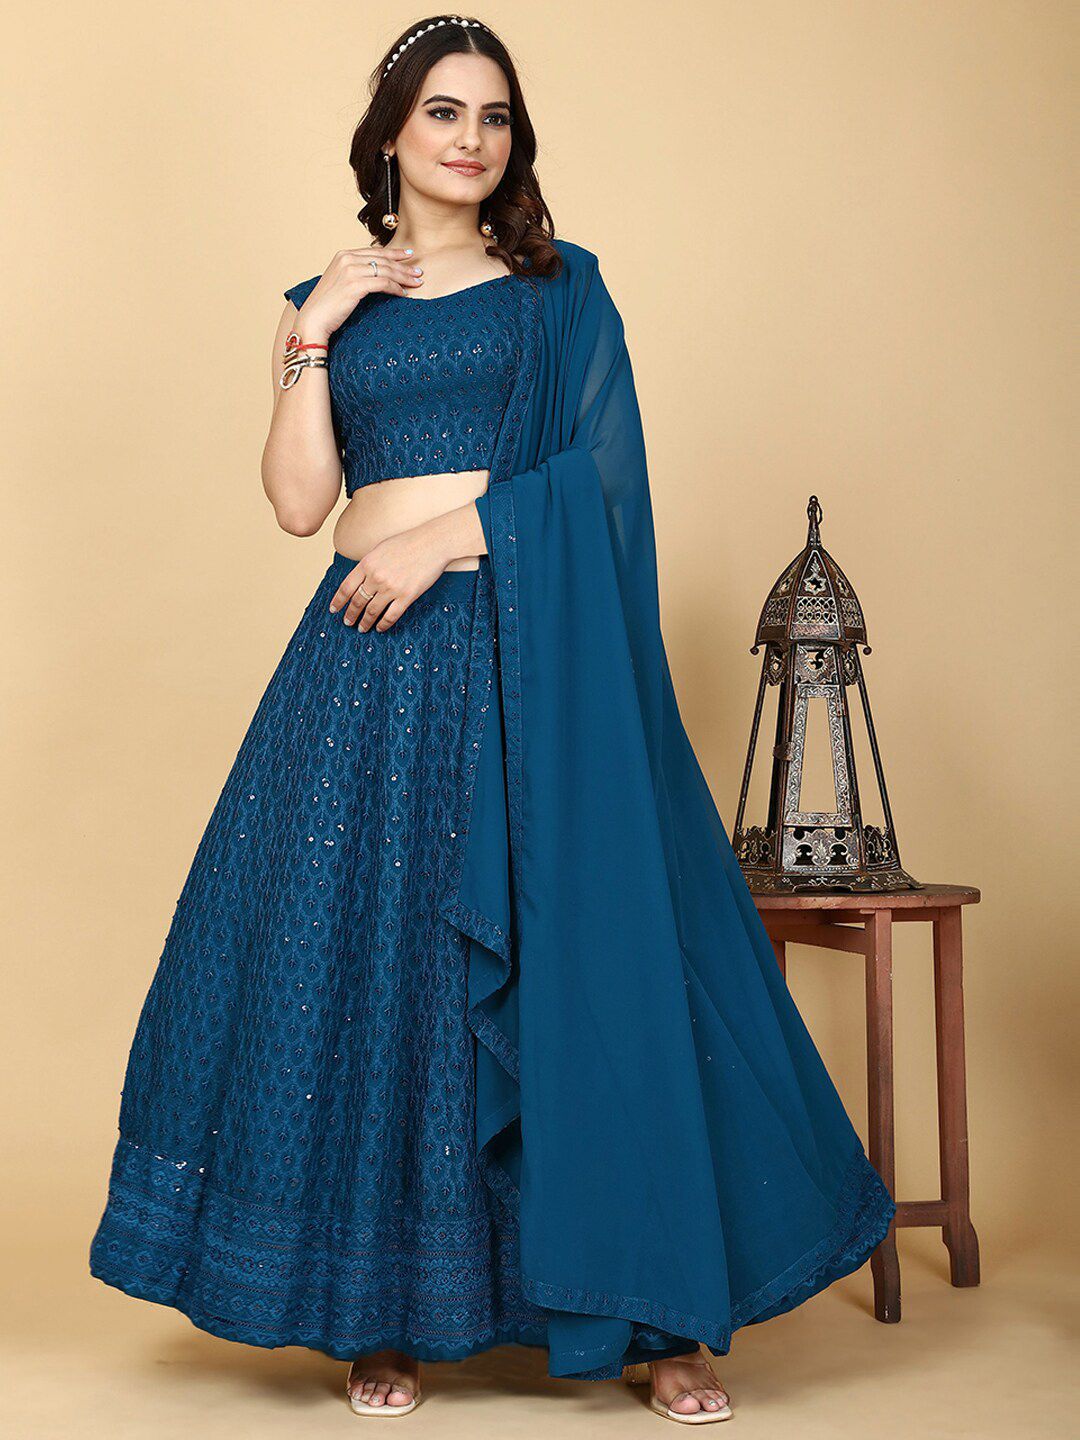 PRENEA Embroidered Ready to Wear Lehenga & Blouse With Dupatta Price in India